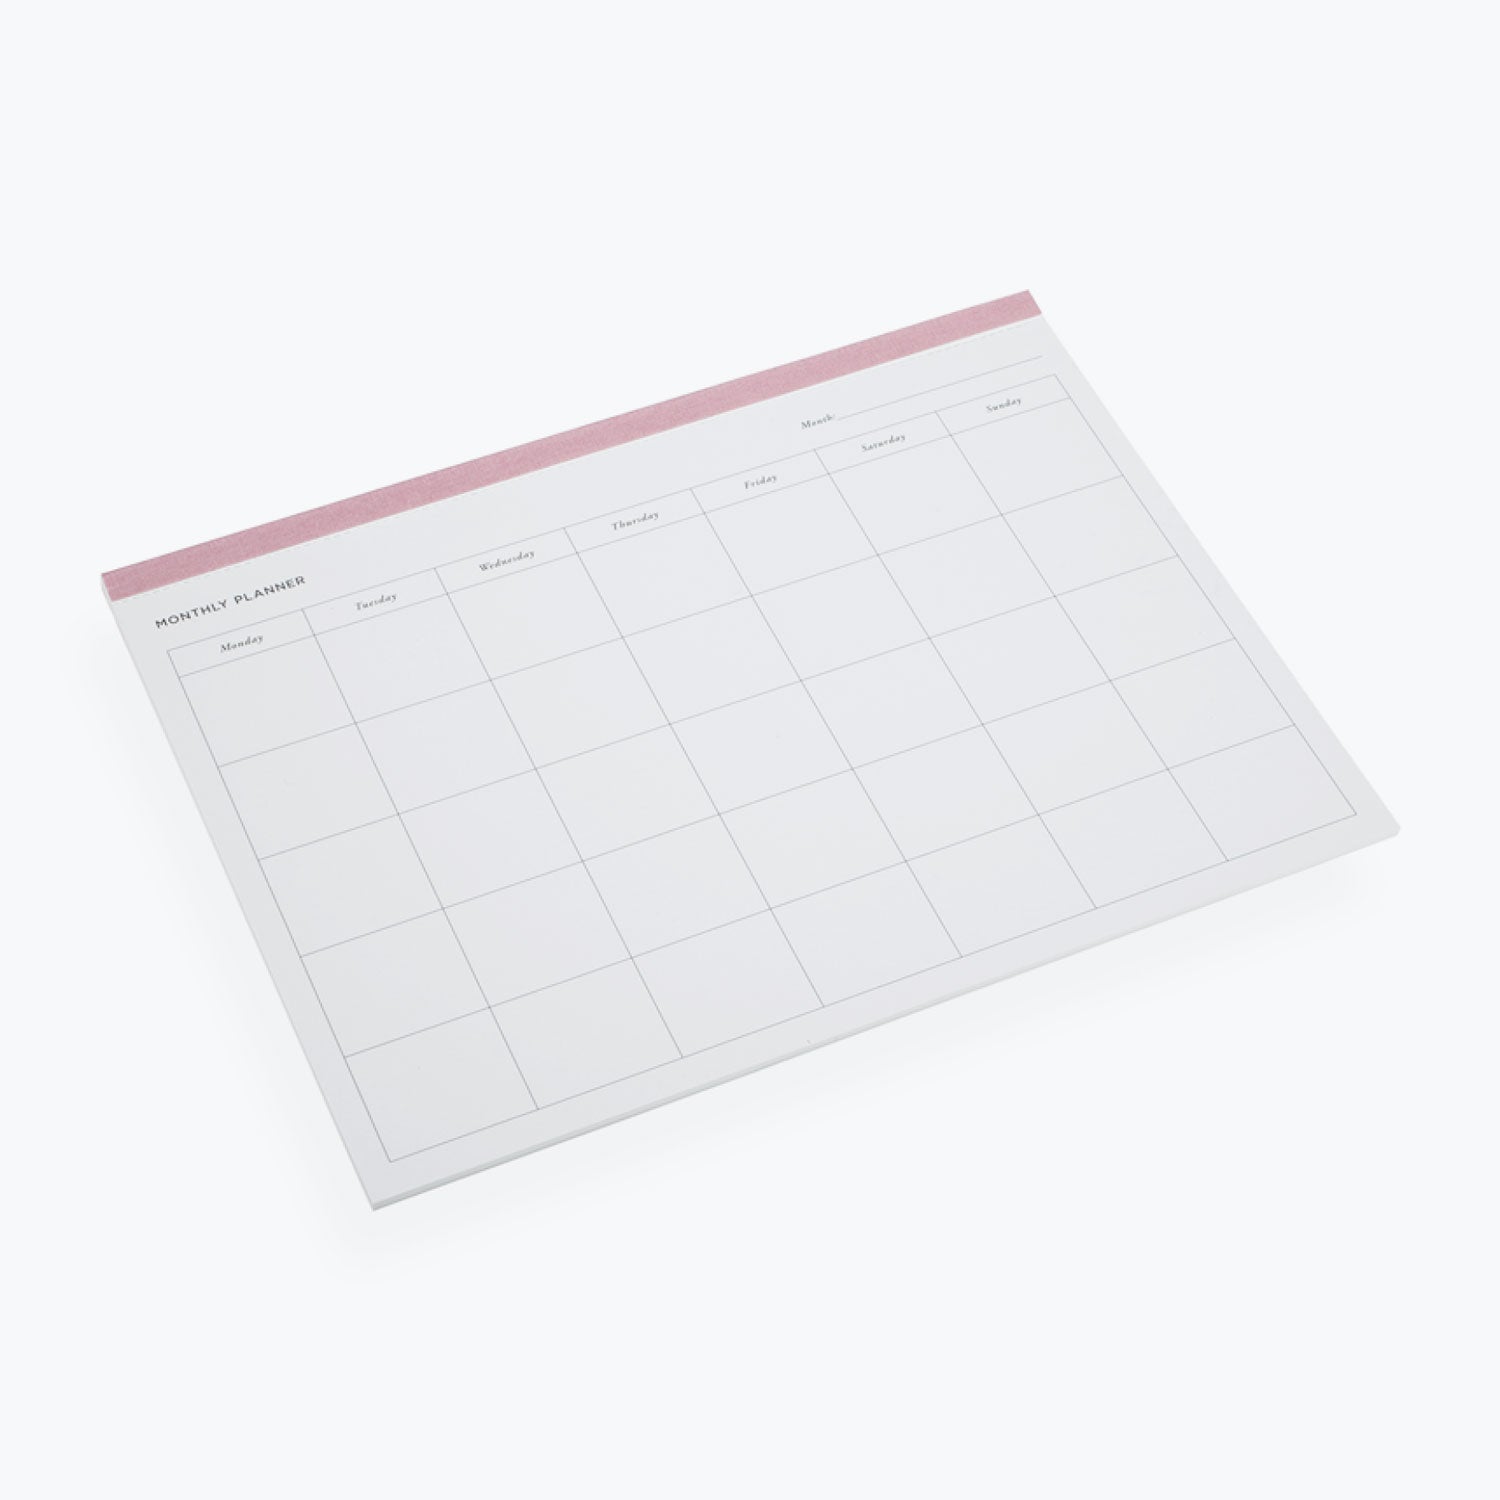 Bookbinders Design - Planner - Monthly - Dusty Pink